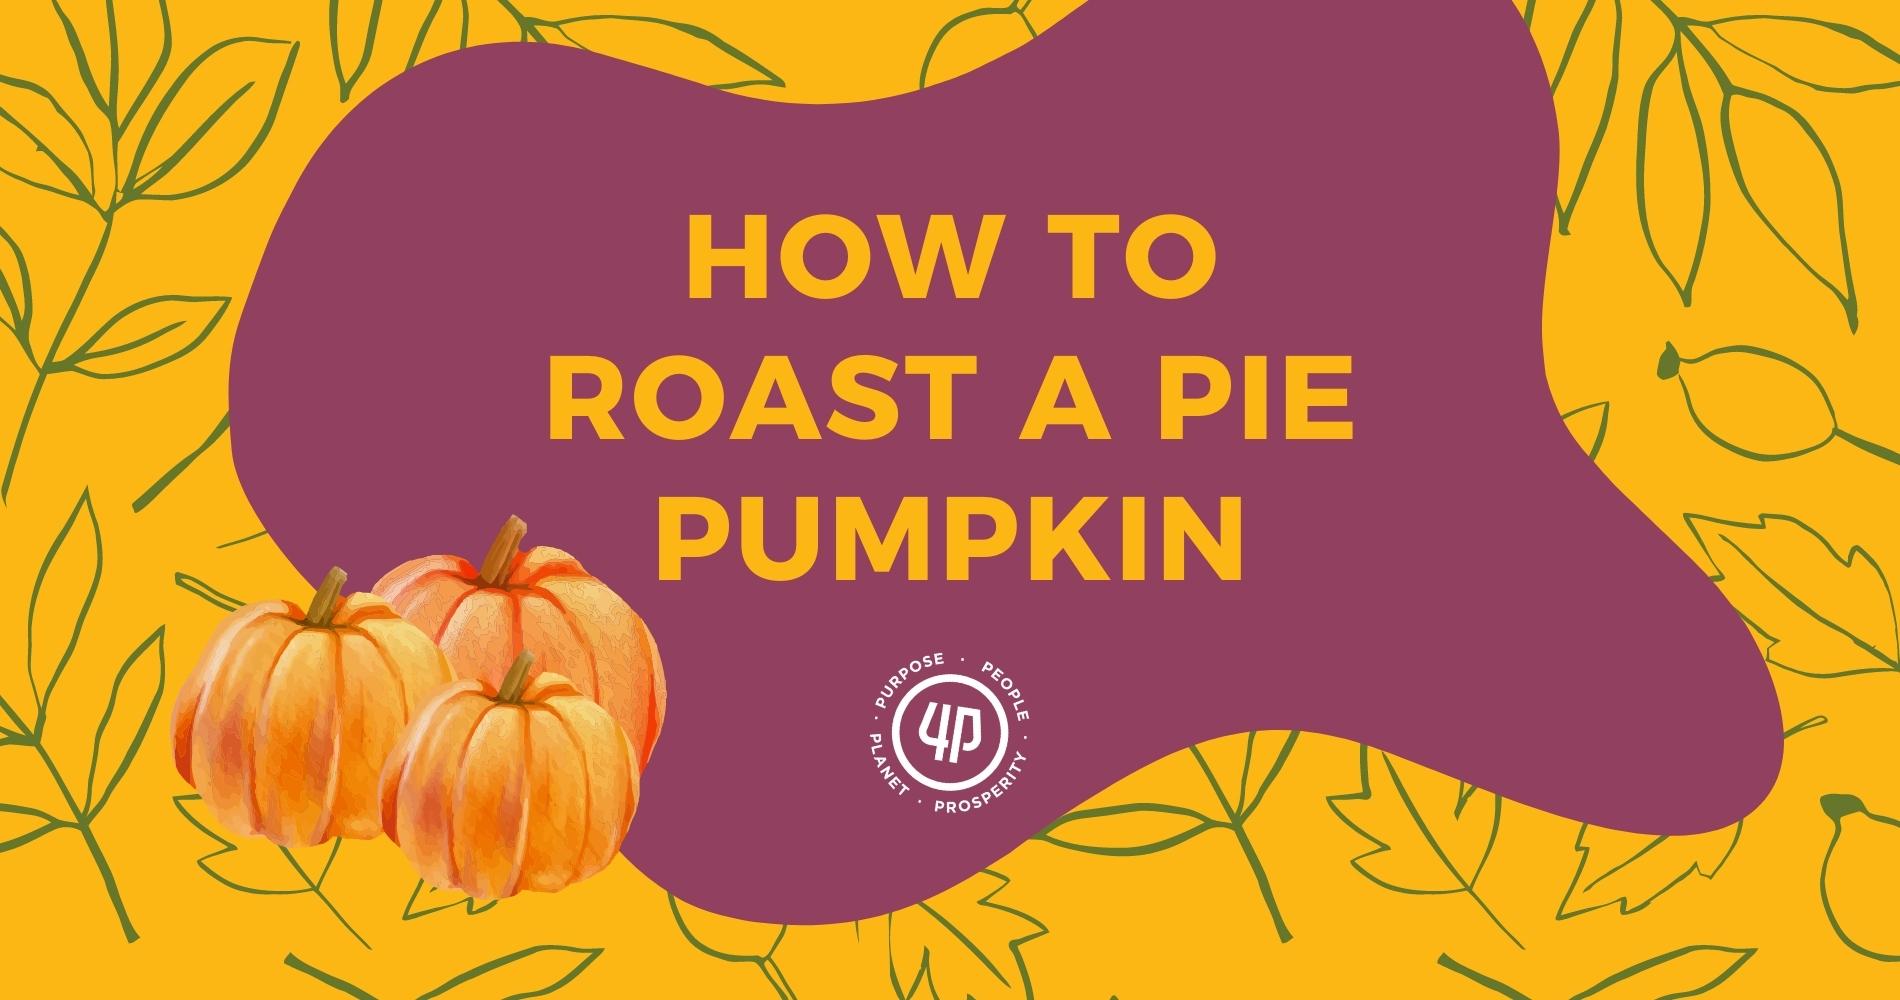 How to Roast a Pie Pumpkin and Get Delicious Pumpkin Puree image